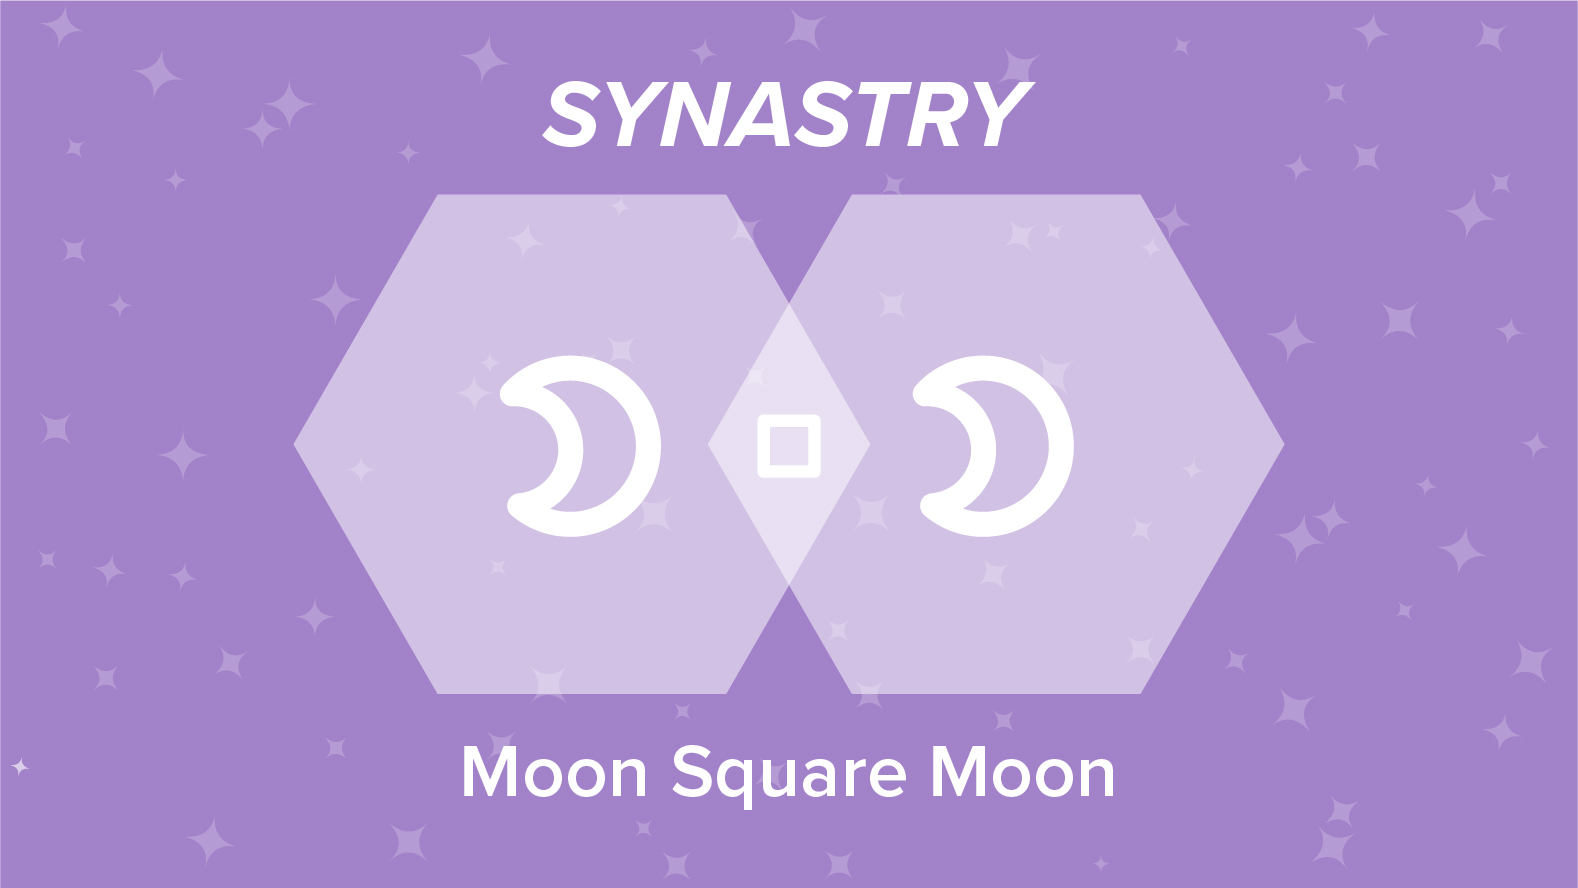 Moon Square Moon Synastry: Relationships and Friendships Explained